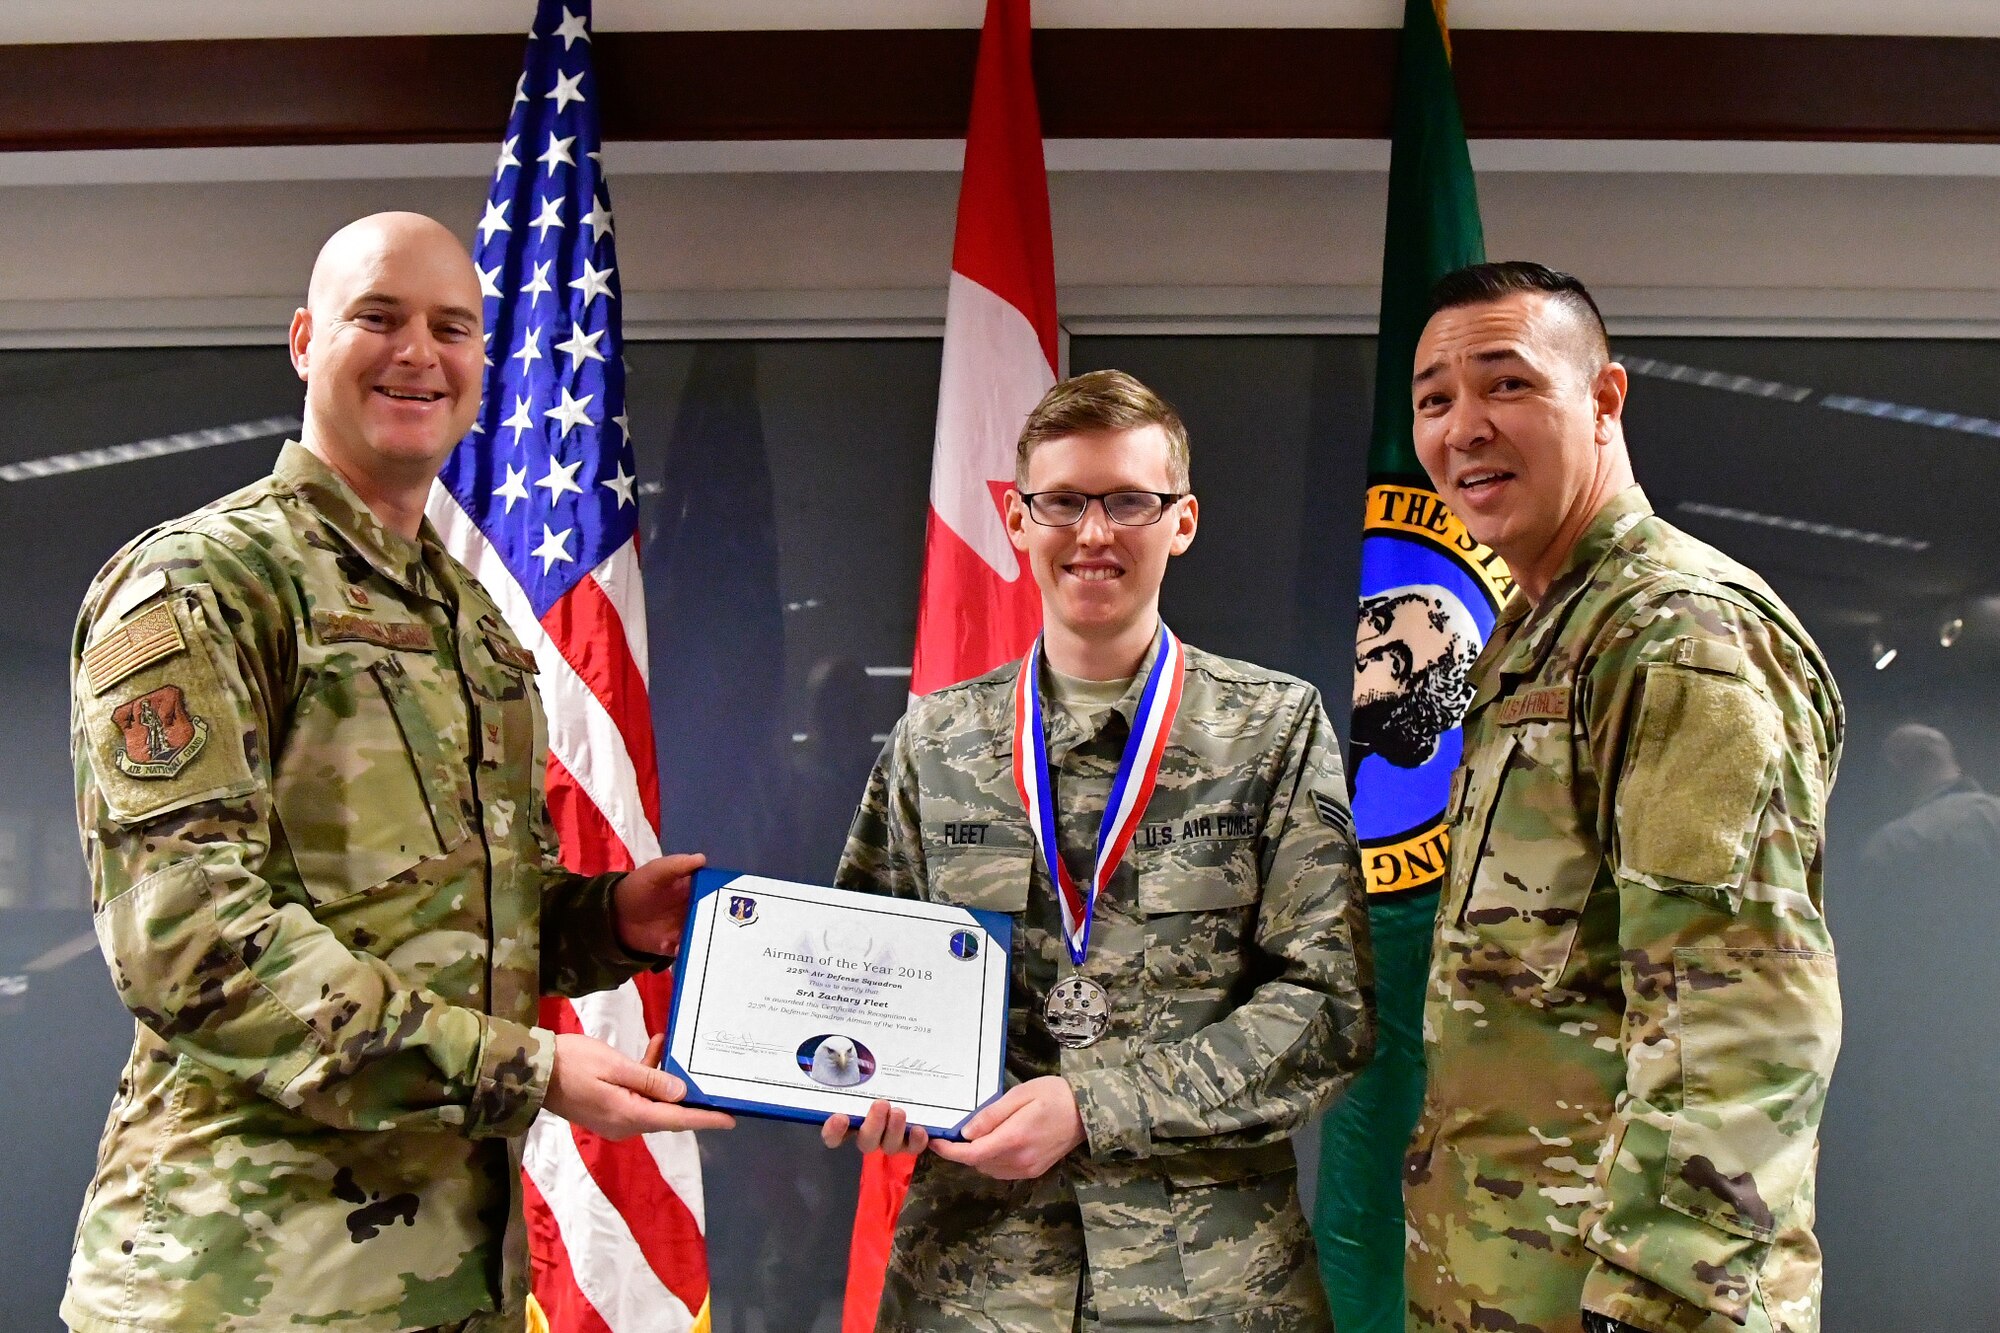 Senior Airman Zachary Fleet, 225th Air Defense Squadron interface control technician is named the 225th ADS Airman of the Year Dec. 1, 2018 on Joint Base Lewis-McChord.  Fleet poses with Col. Brett Bosselmann (left), 225th ADS commander and Chief Master Sgt. Allan Lawson, 225th ADS chief enlisted manager. (U.S. Air National Guard photo by Maj. Kimberly D. Burke)